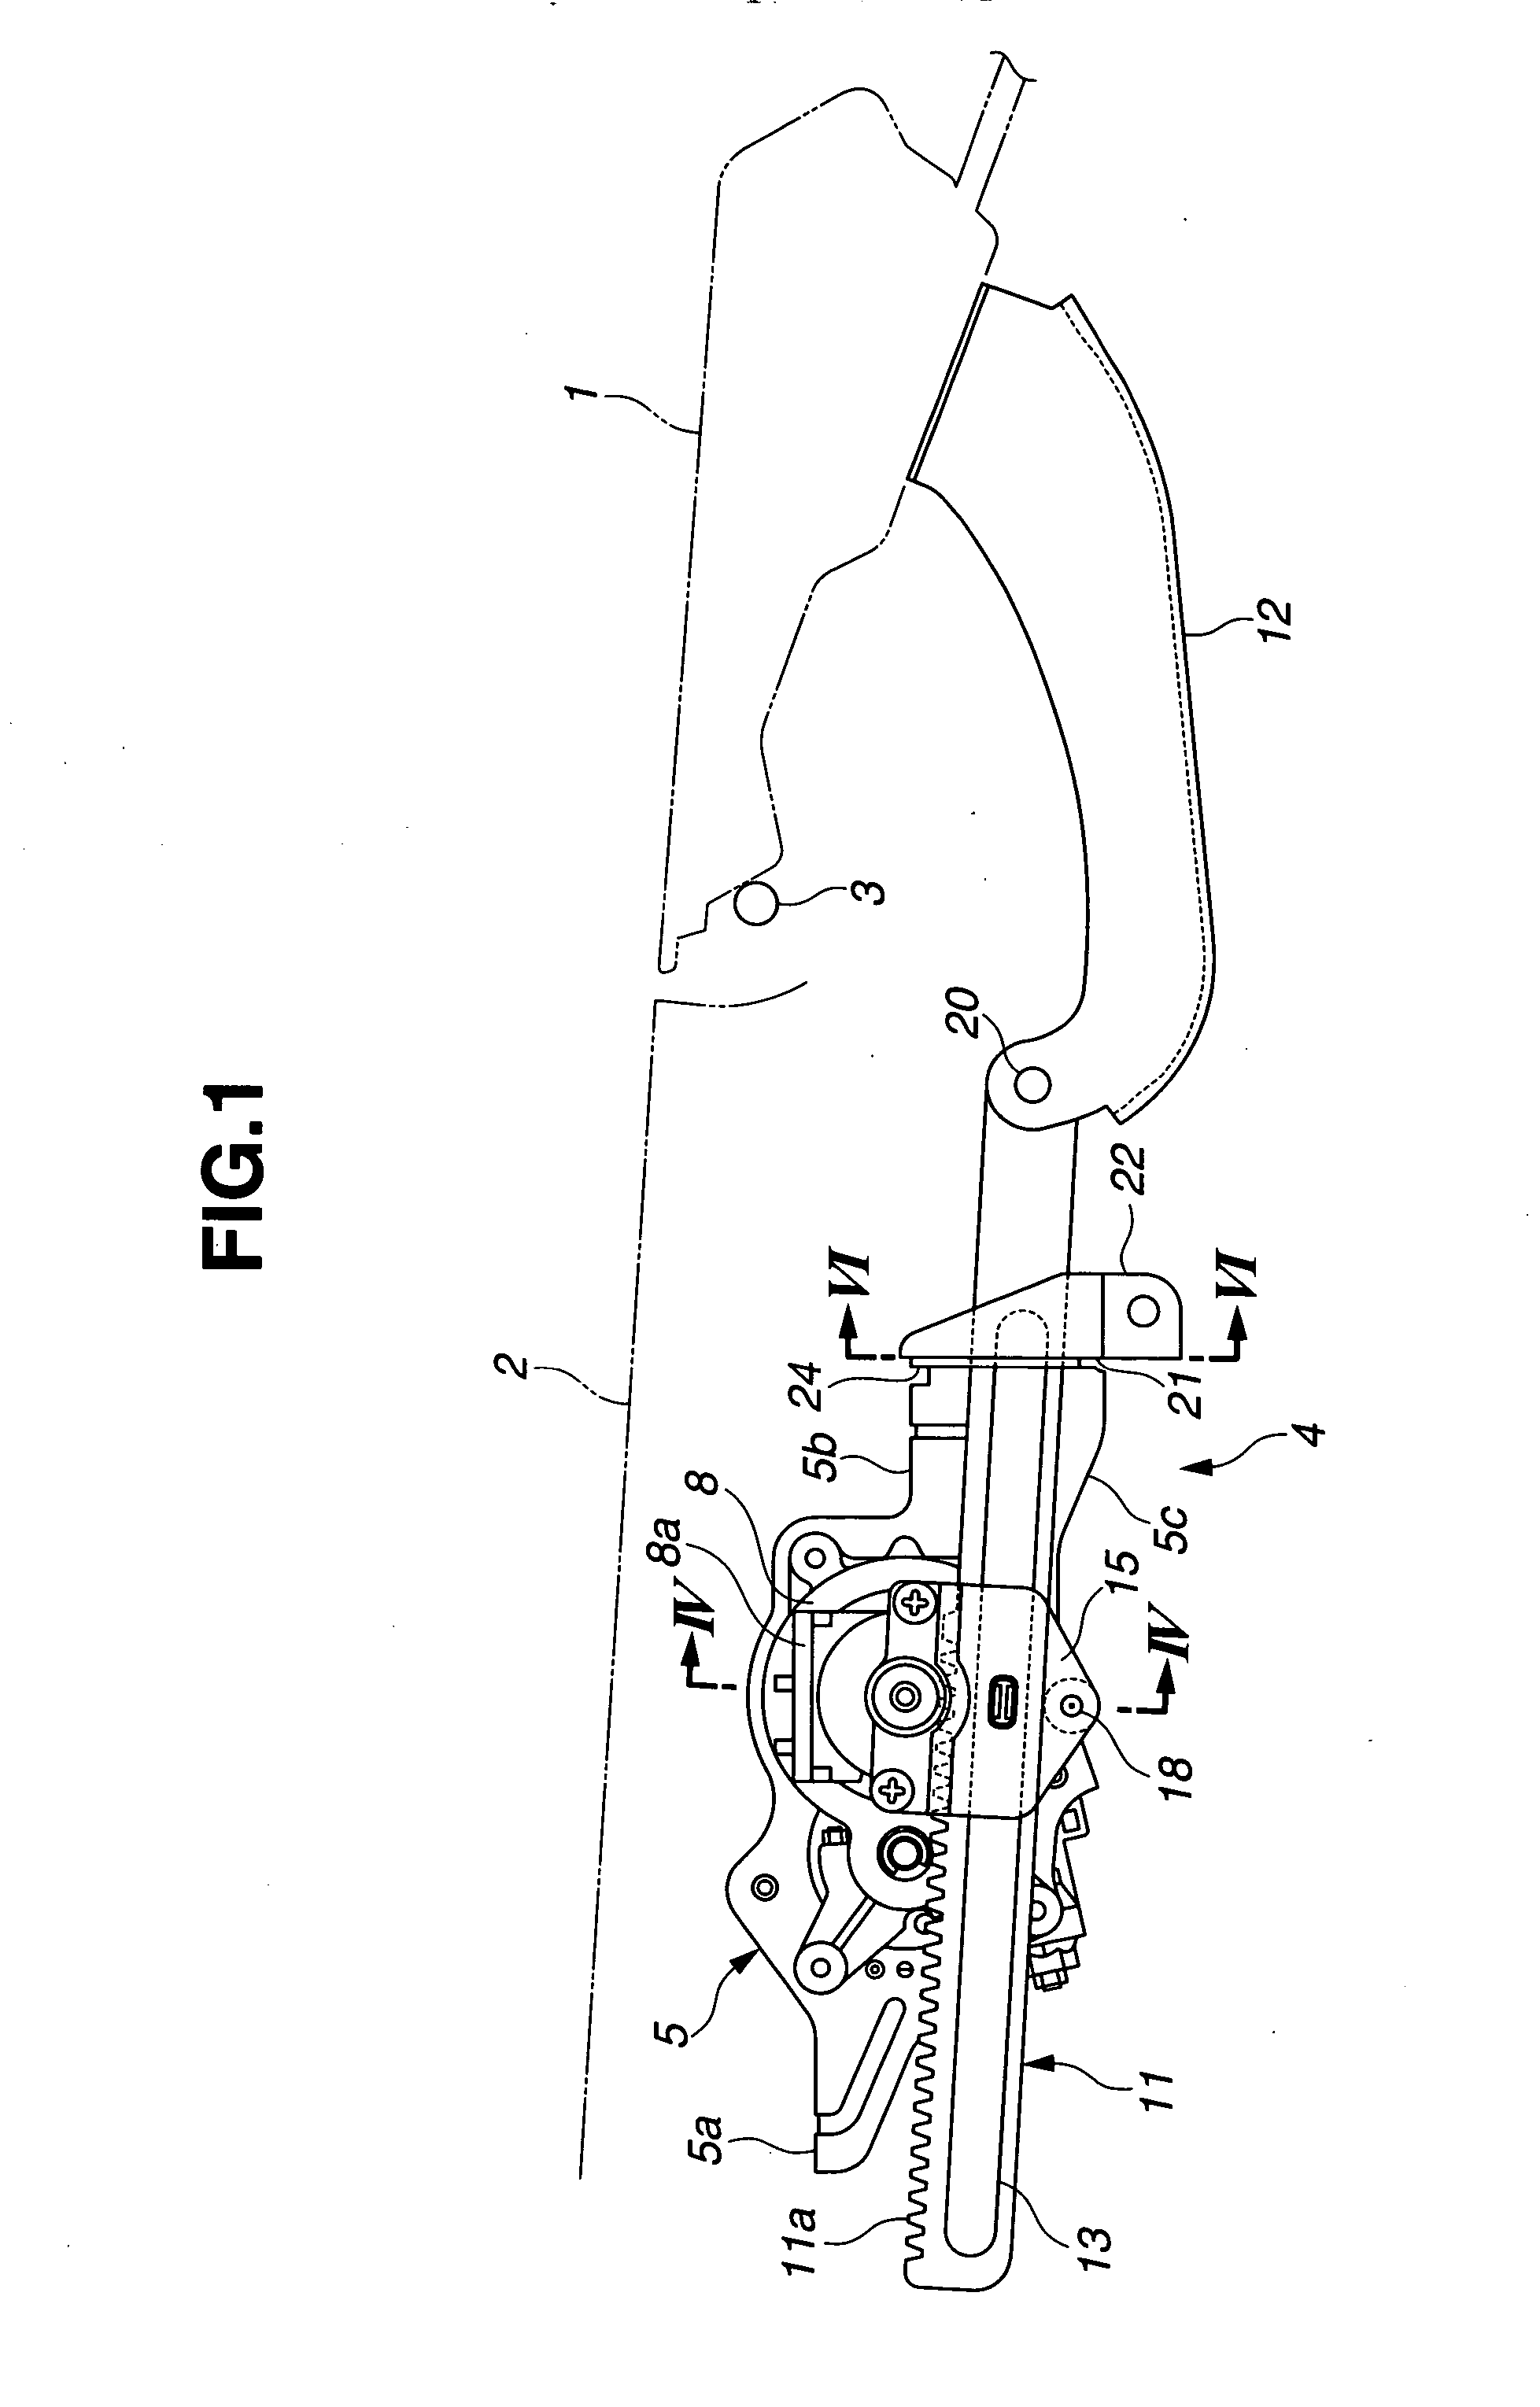 Opening and closing apparatus for opening and closing body of vehicle